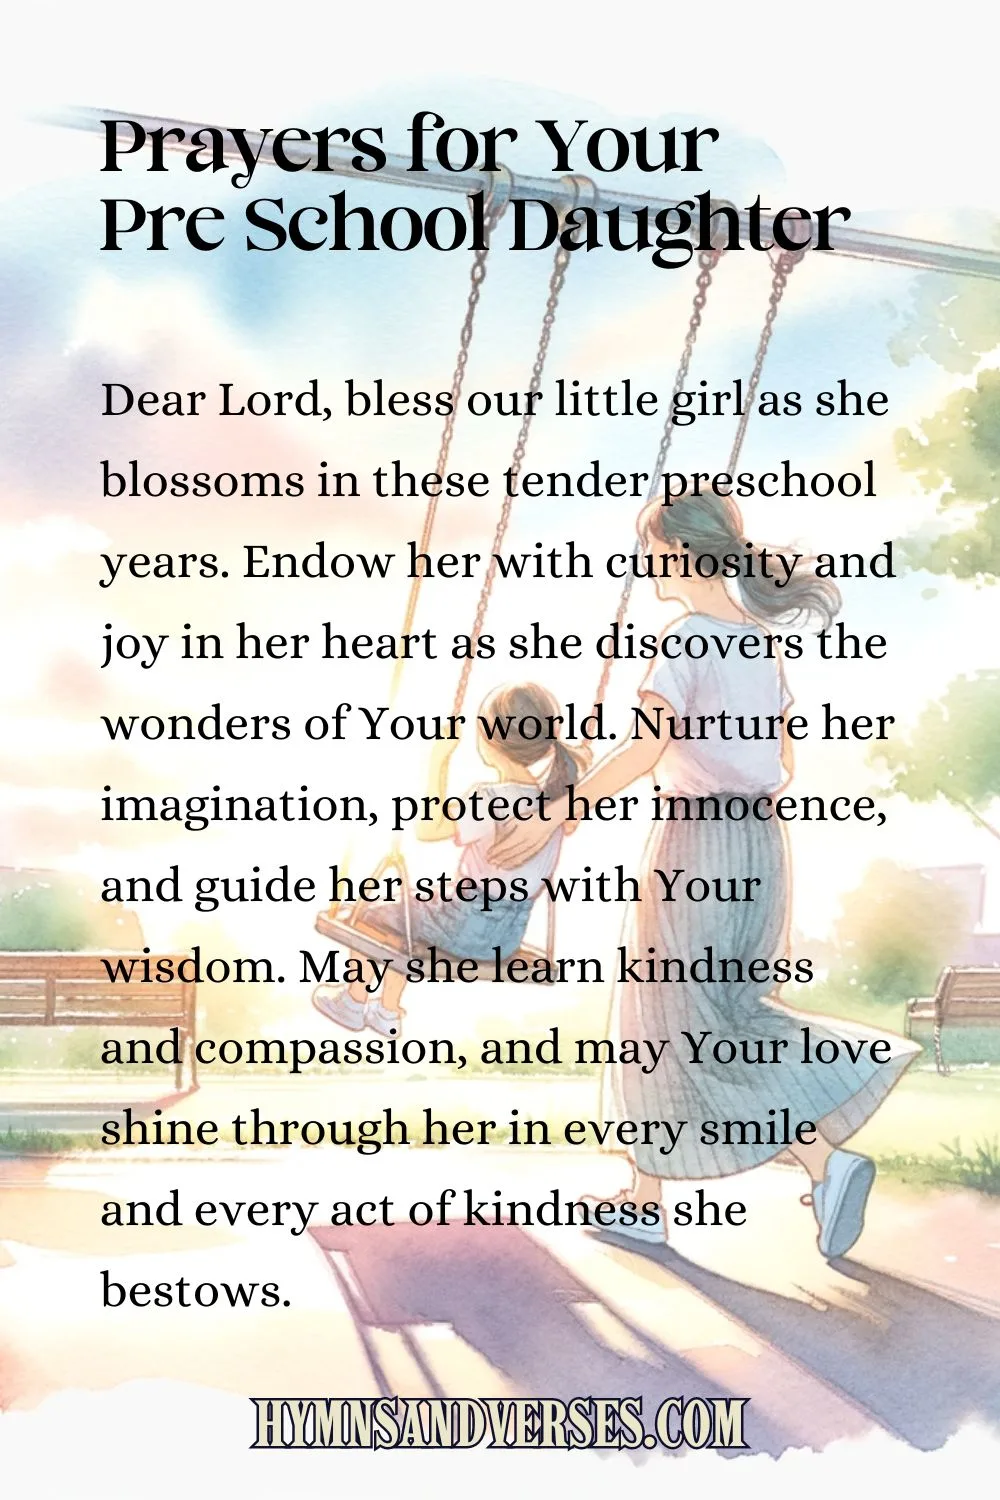 Pin image for prayers for your pre school daughter, reads: Dear Lord, bless our little girl as she blossoms in these tender preschool years. Endow her with curiosity and joy in her heart as she discovers the wonders of Your world. Nurture her imagination, protect her innocence, and guide her steps with Your wisdom. May she learn kindness and compassion, and may Your love shine through her in every smile and every act of kindness she bestows.